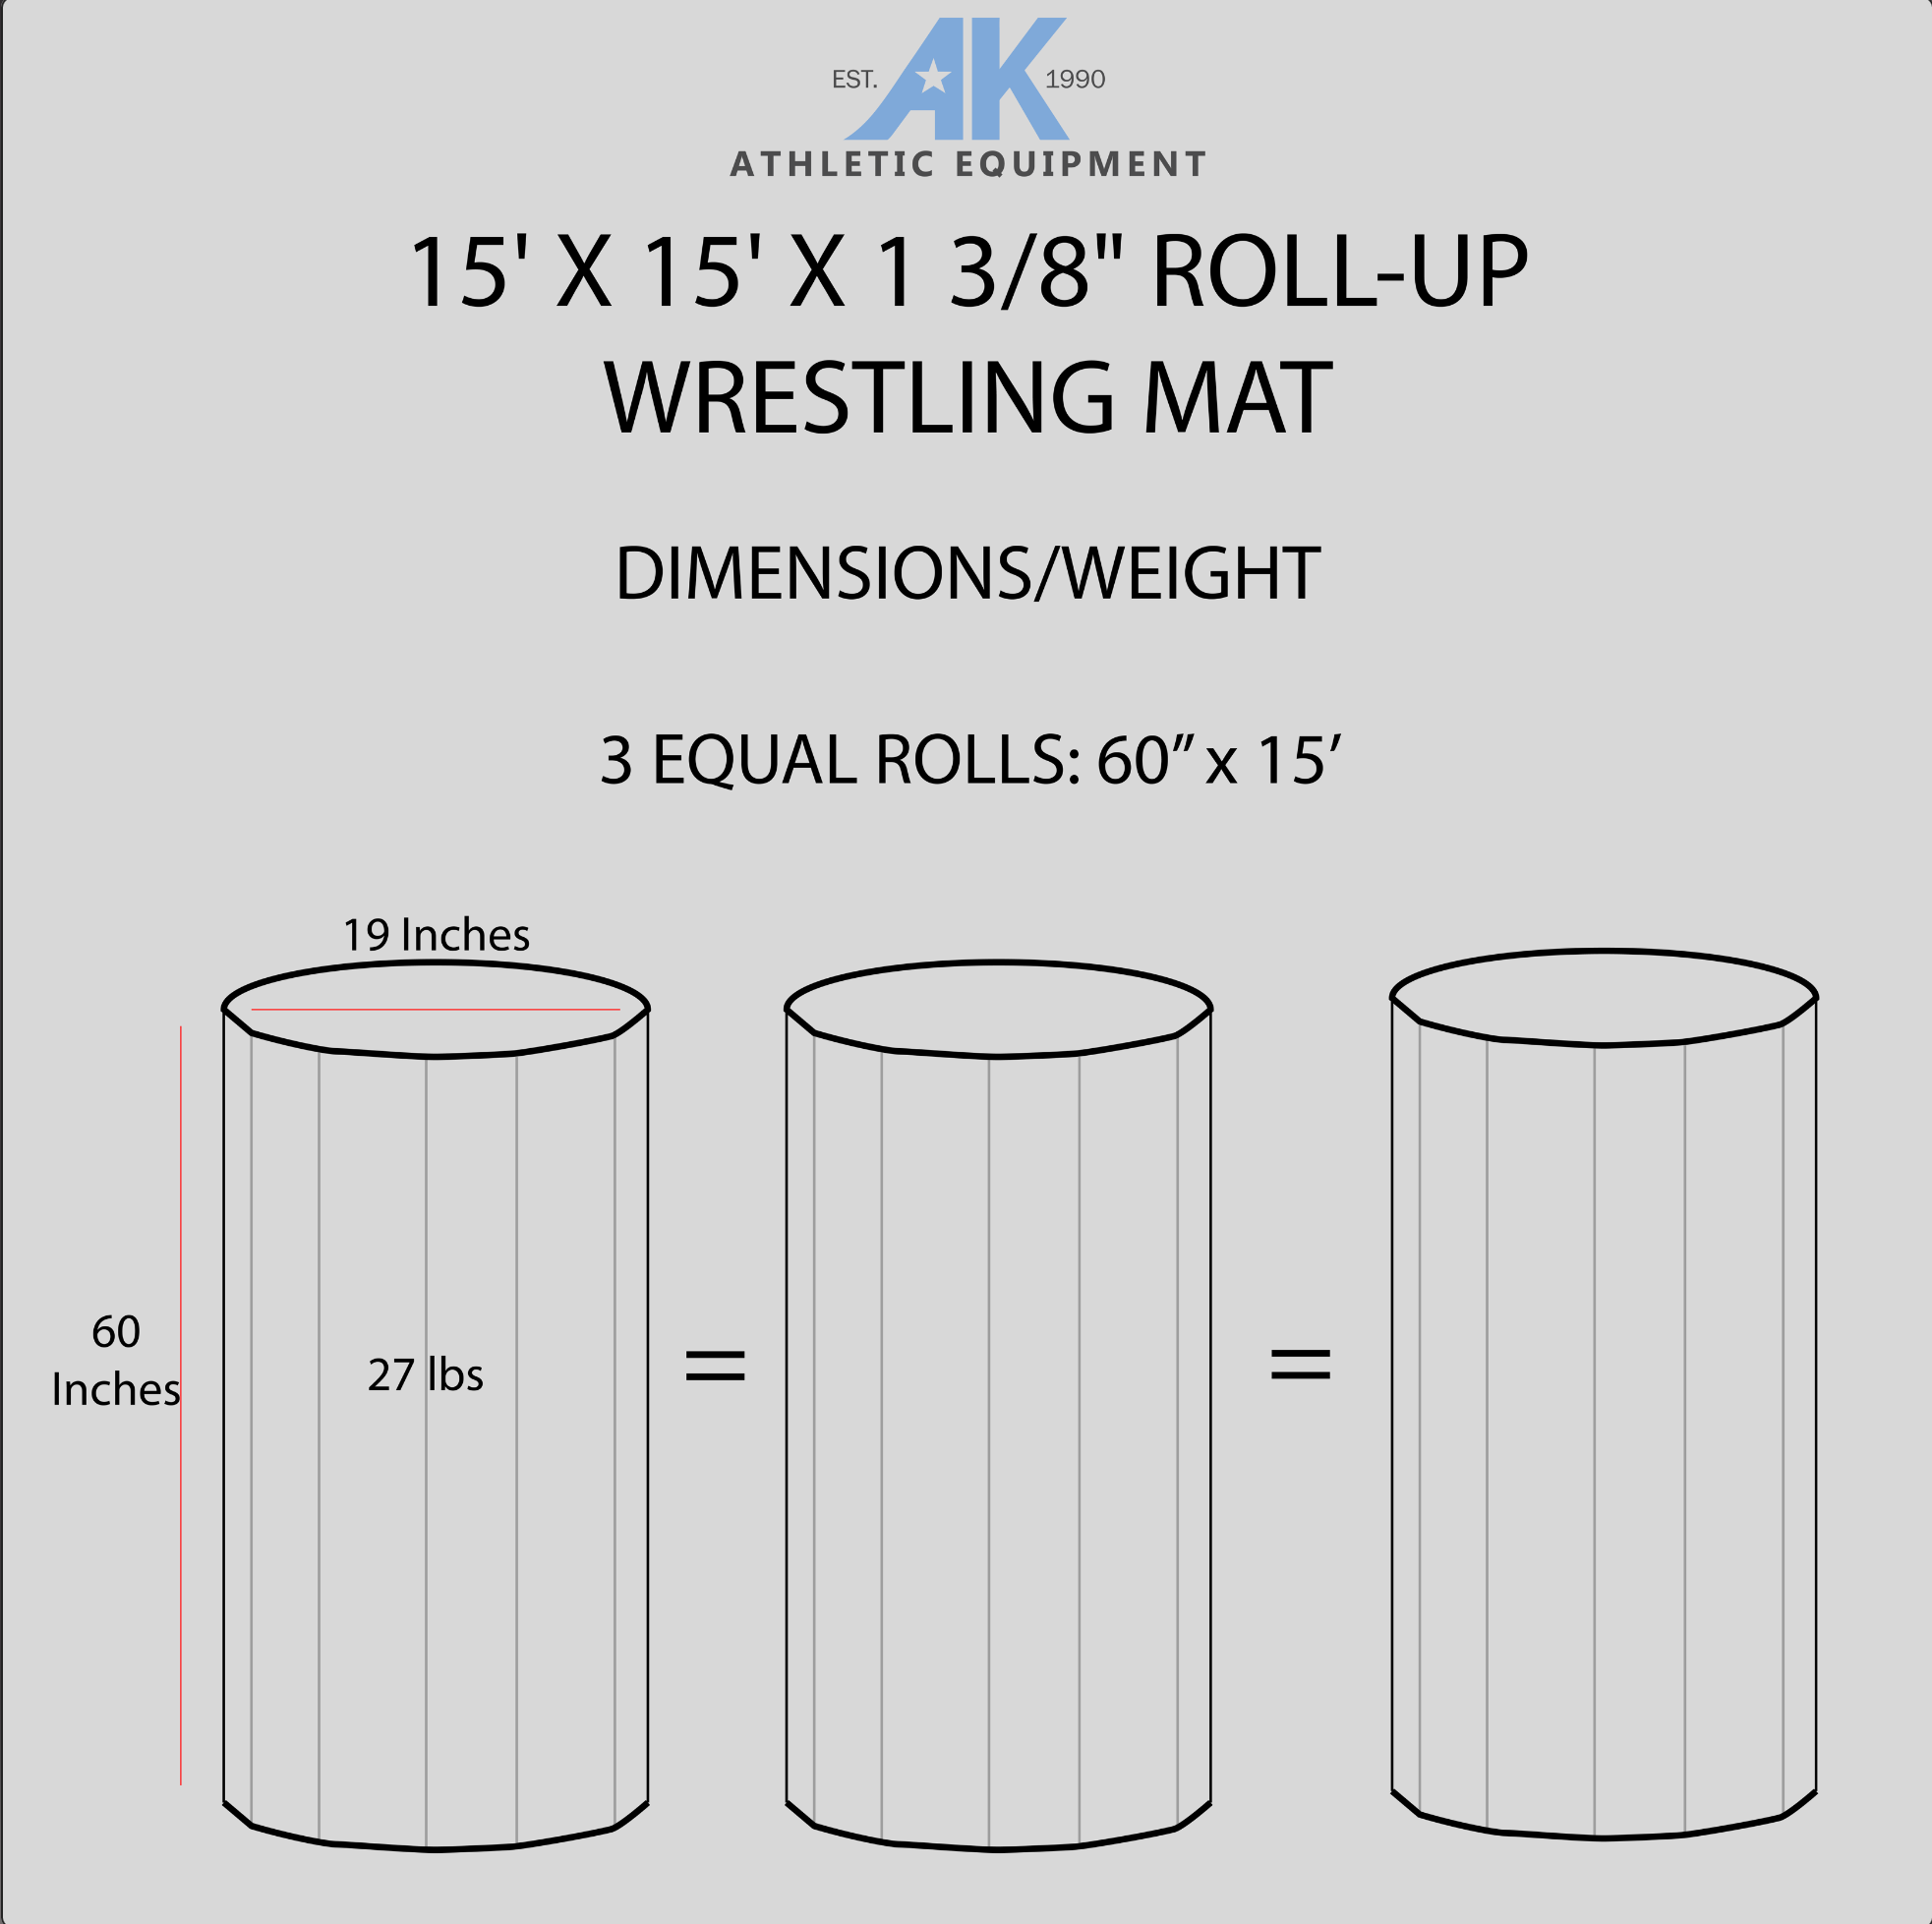 Product dimensions for storing AK Athletic Equipment wrestling mats. Wrestling mats are available with custom printing and size specifications.